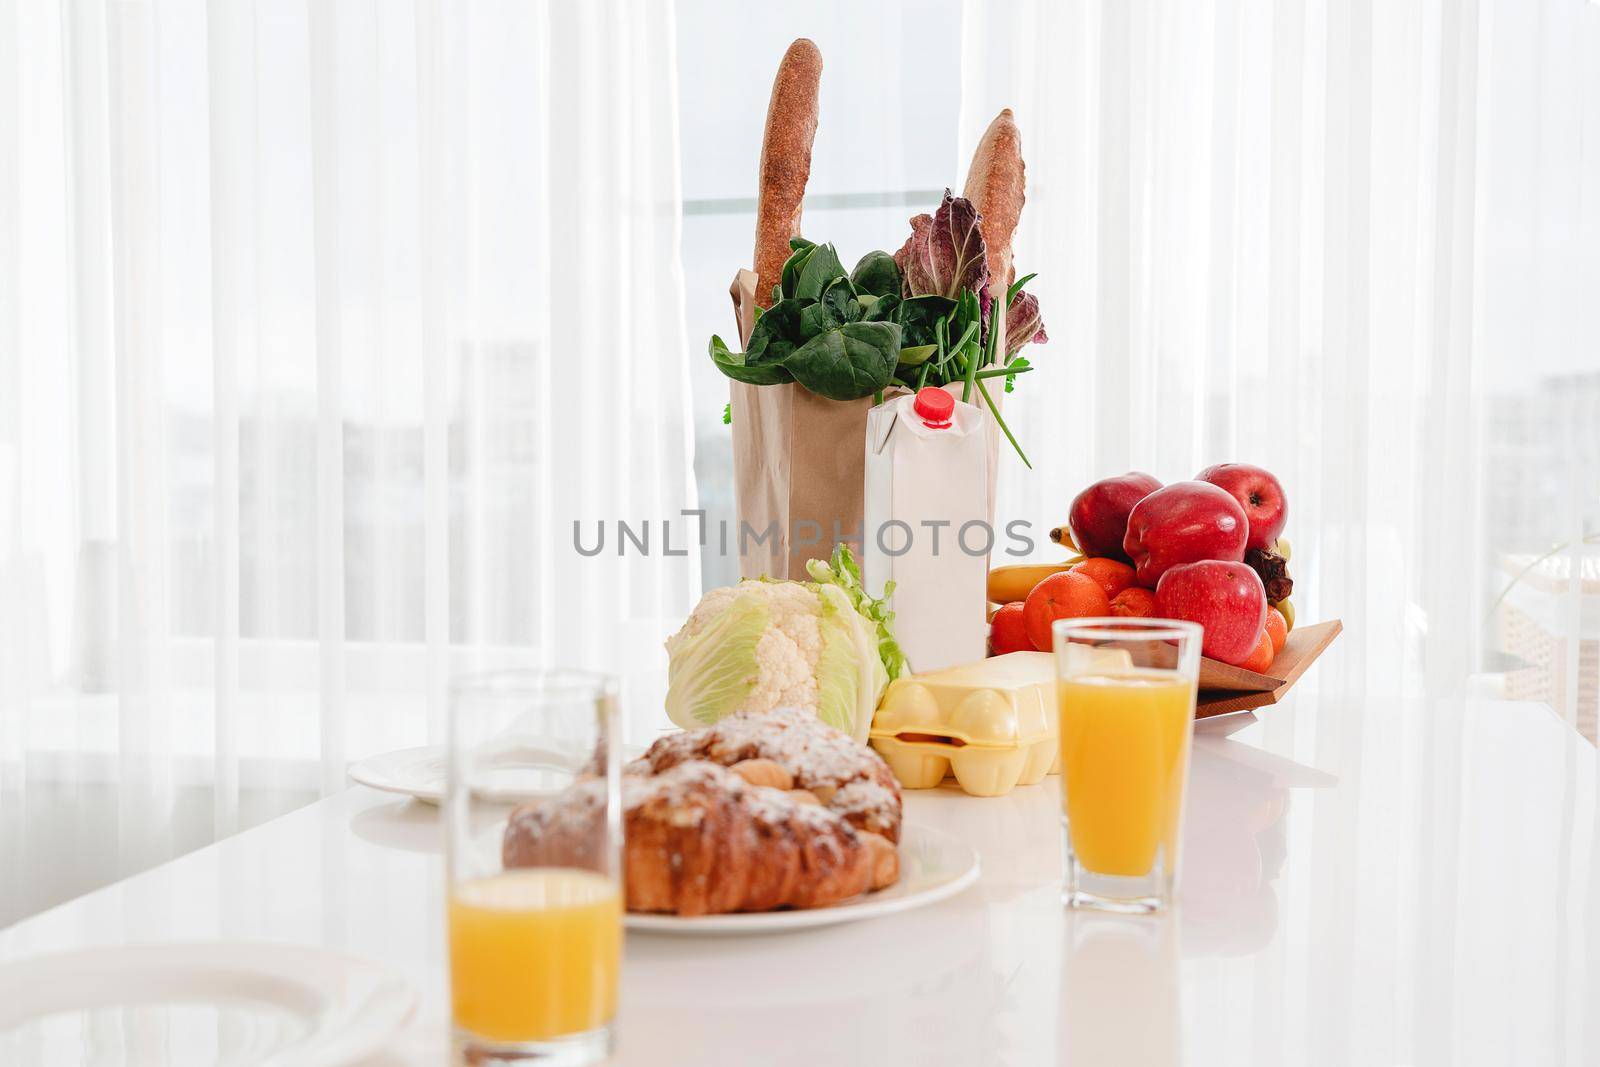 A plate of food on a table next to a window. High quality photo